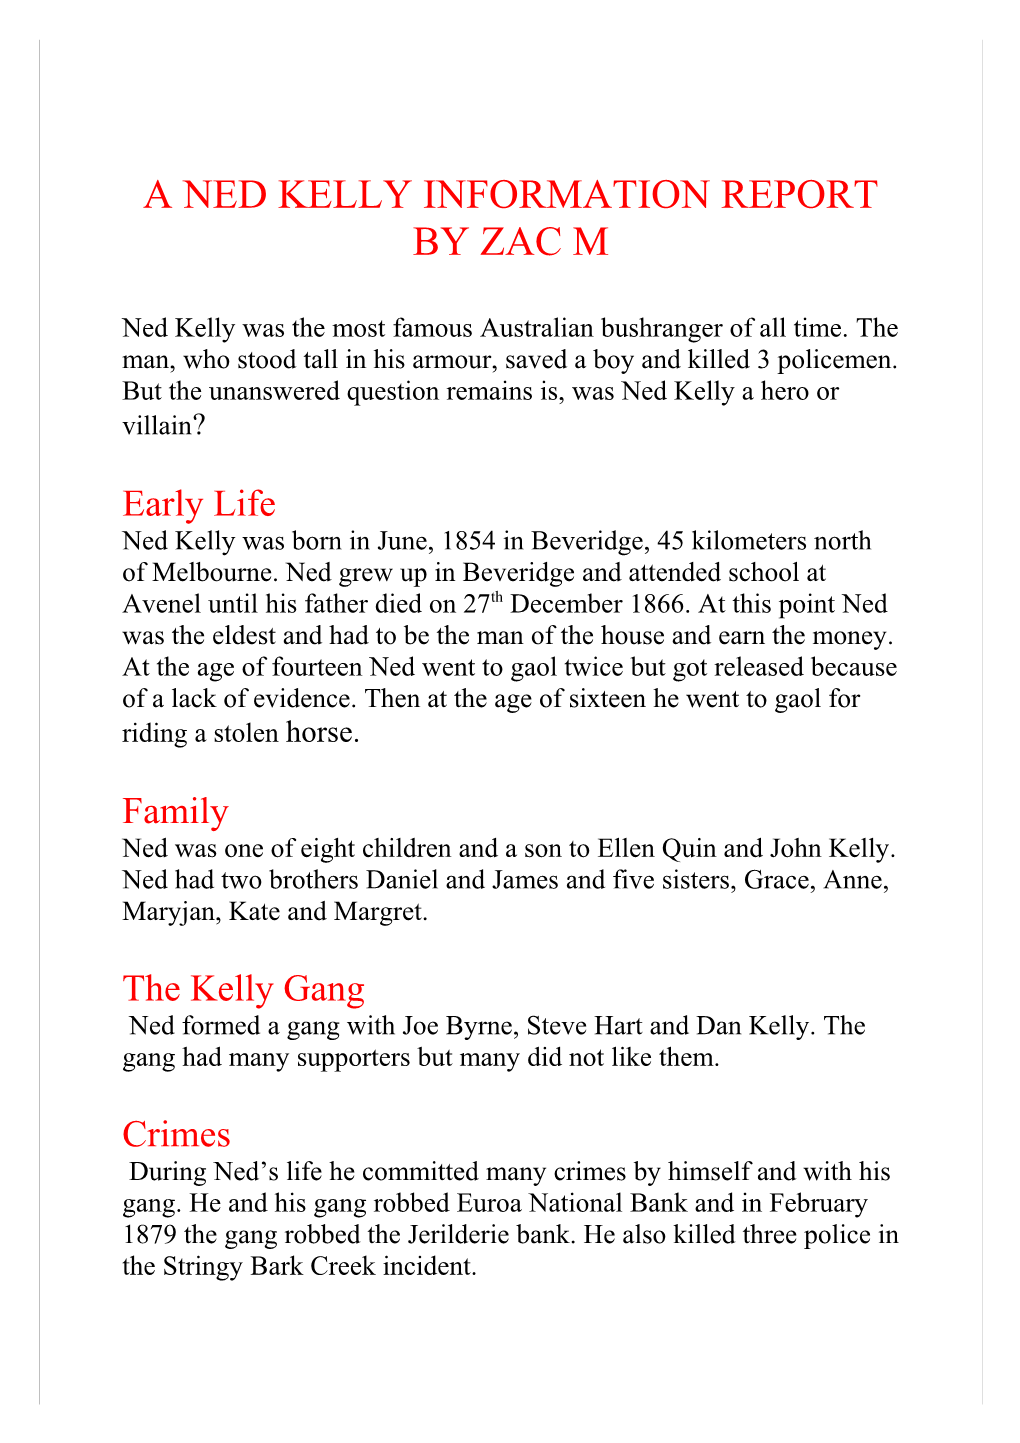 Ned Kelly Information Report